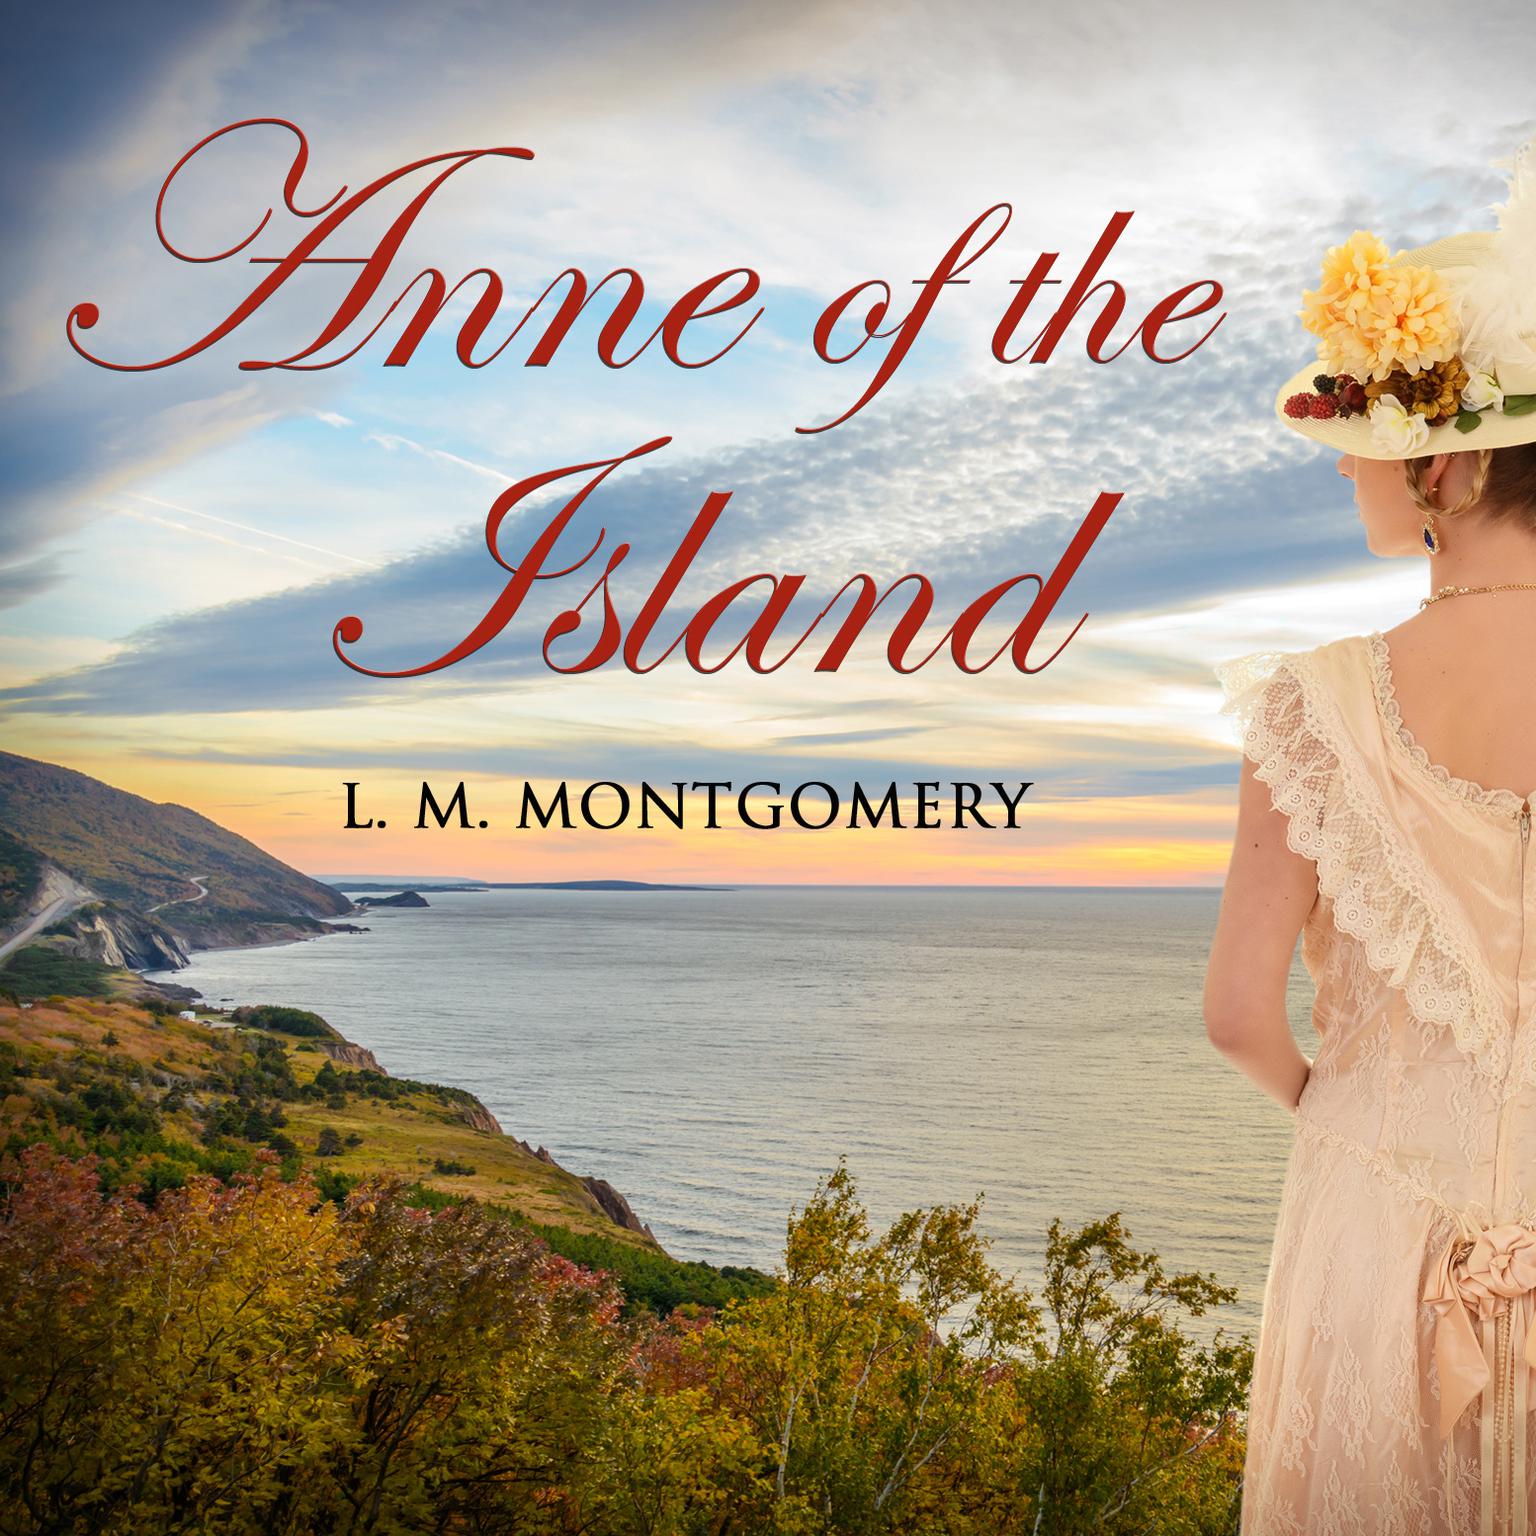 Anne of the Island Audiobook, by L. M. Montgomery